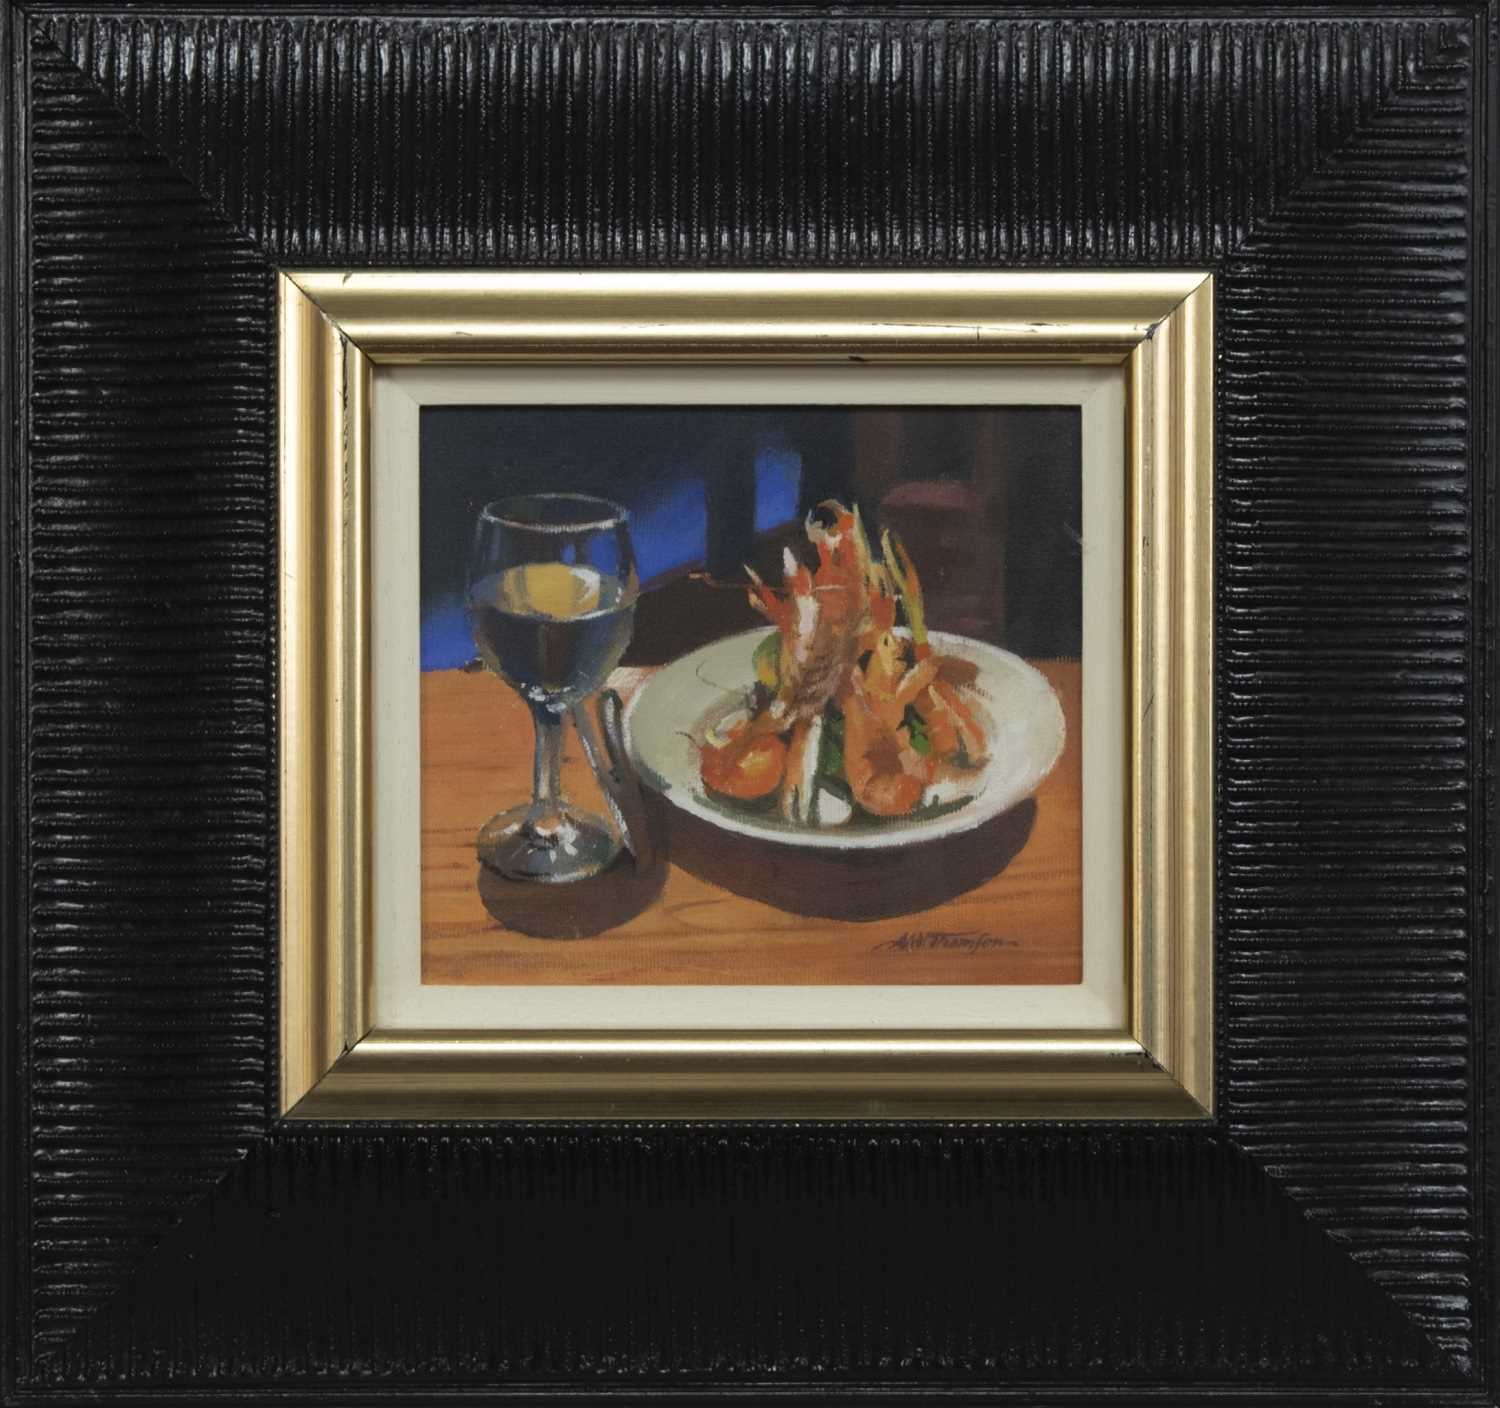 Lot 565 - CHABLIS AND LANGOUSTINE AT ROGANO, AN OIL BY ALASTAIR THOMSON